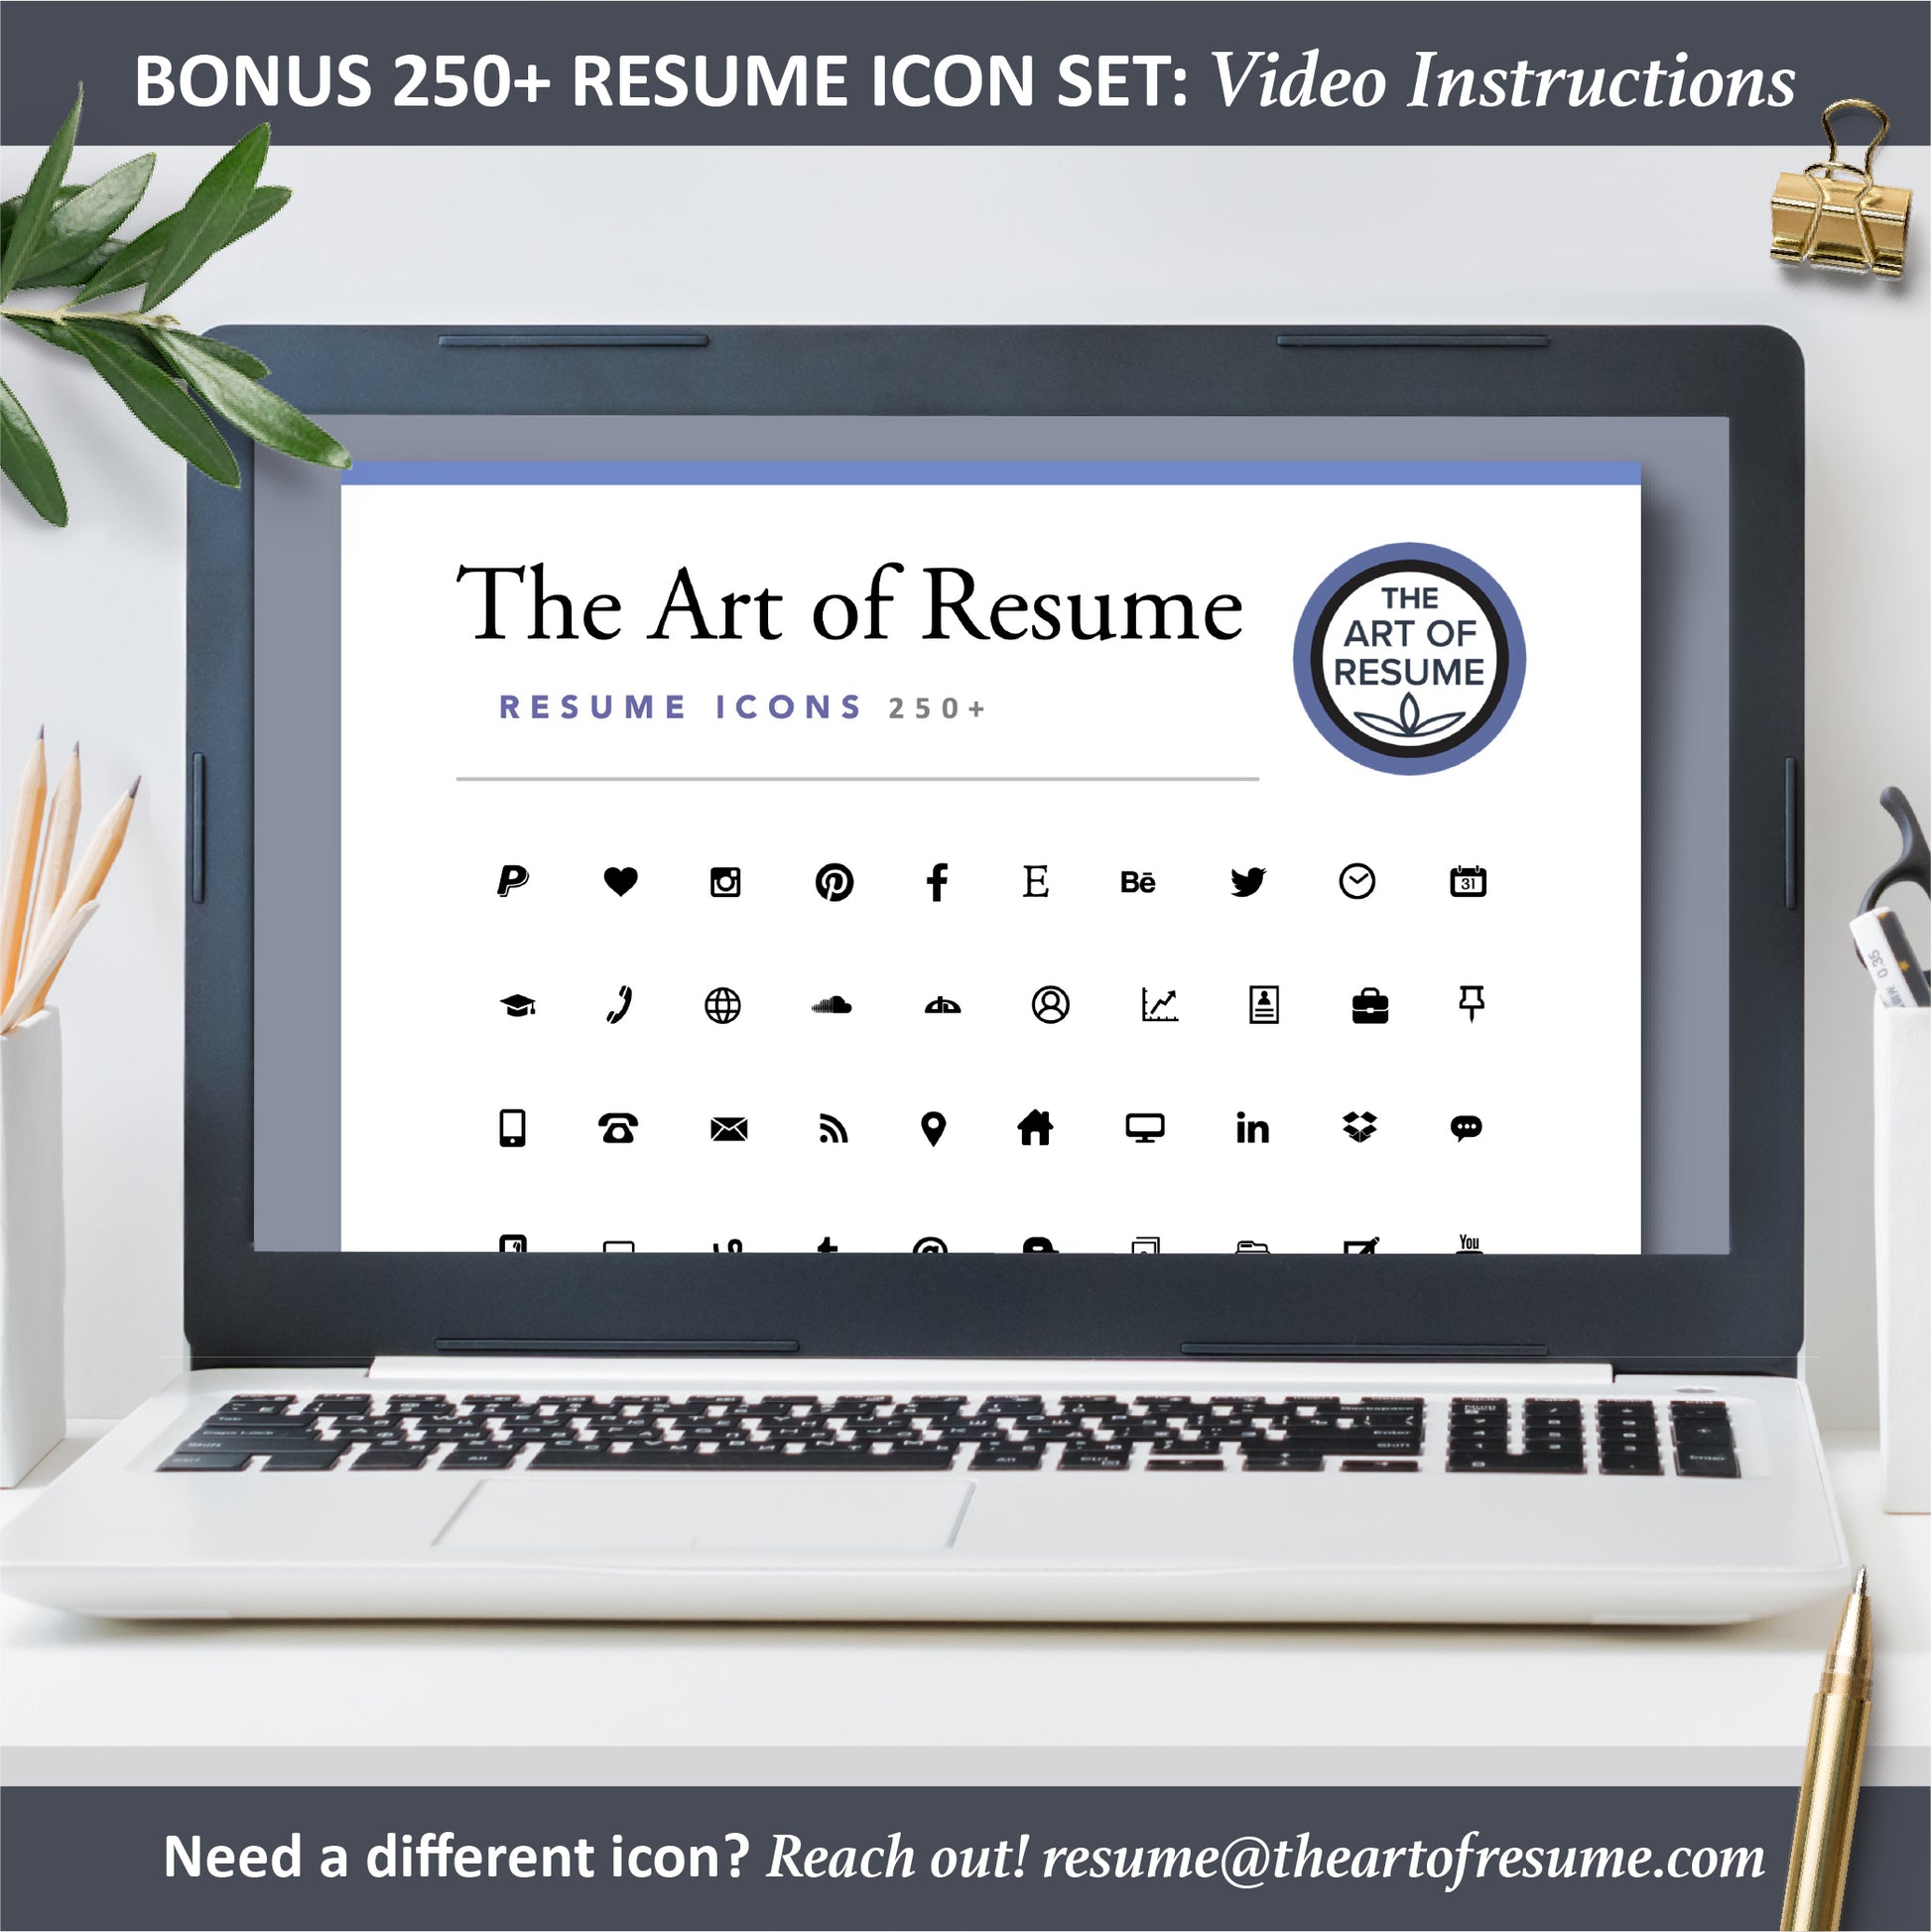 The Art of Resume | Teal Blue Resume Template Design Bundle Download | Free Resume Icons Included